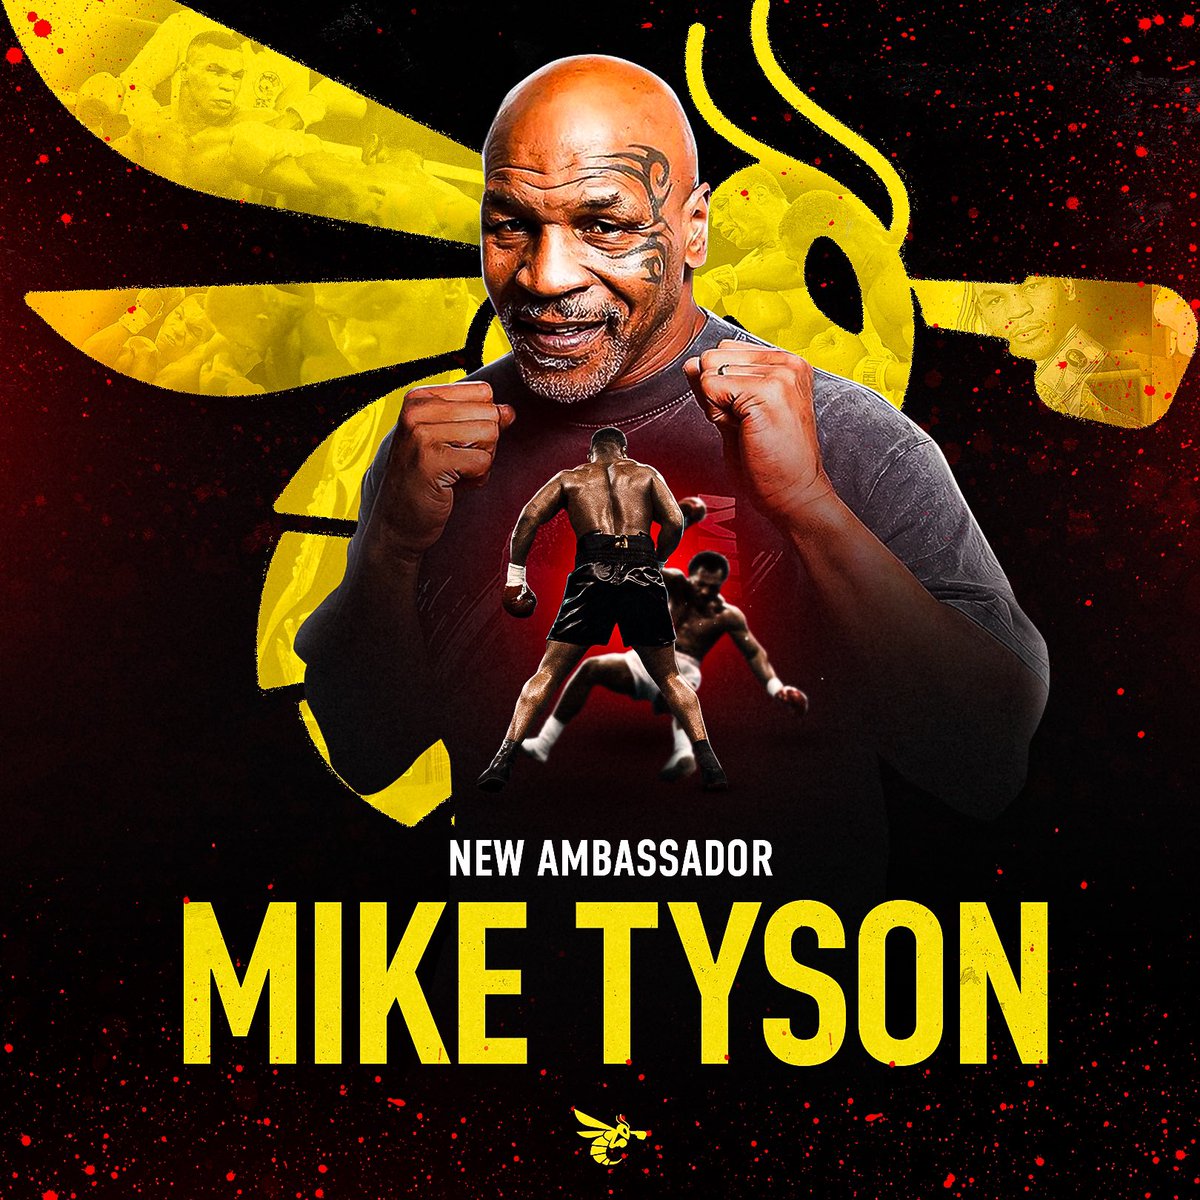 EPIC Ambassador Alert! 🔥 Mike Tyson @miketyson joined Ready To Fight as a new ambassador! Can you believe it? One of the most iconic figures in the boxing world has teamed up with our project! Let's make some noise and fuel this epic event! 🐝